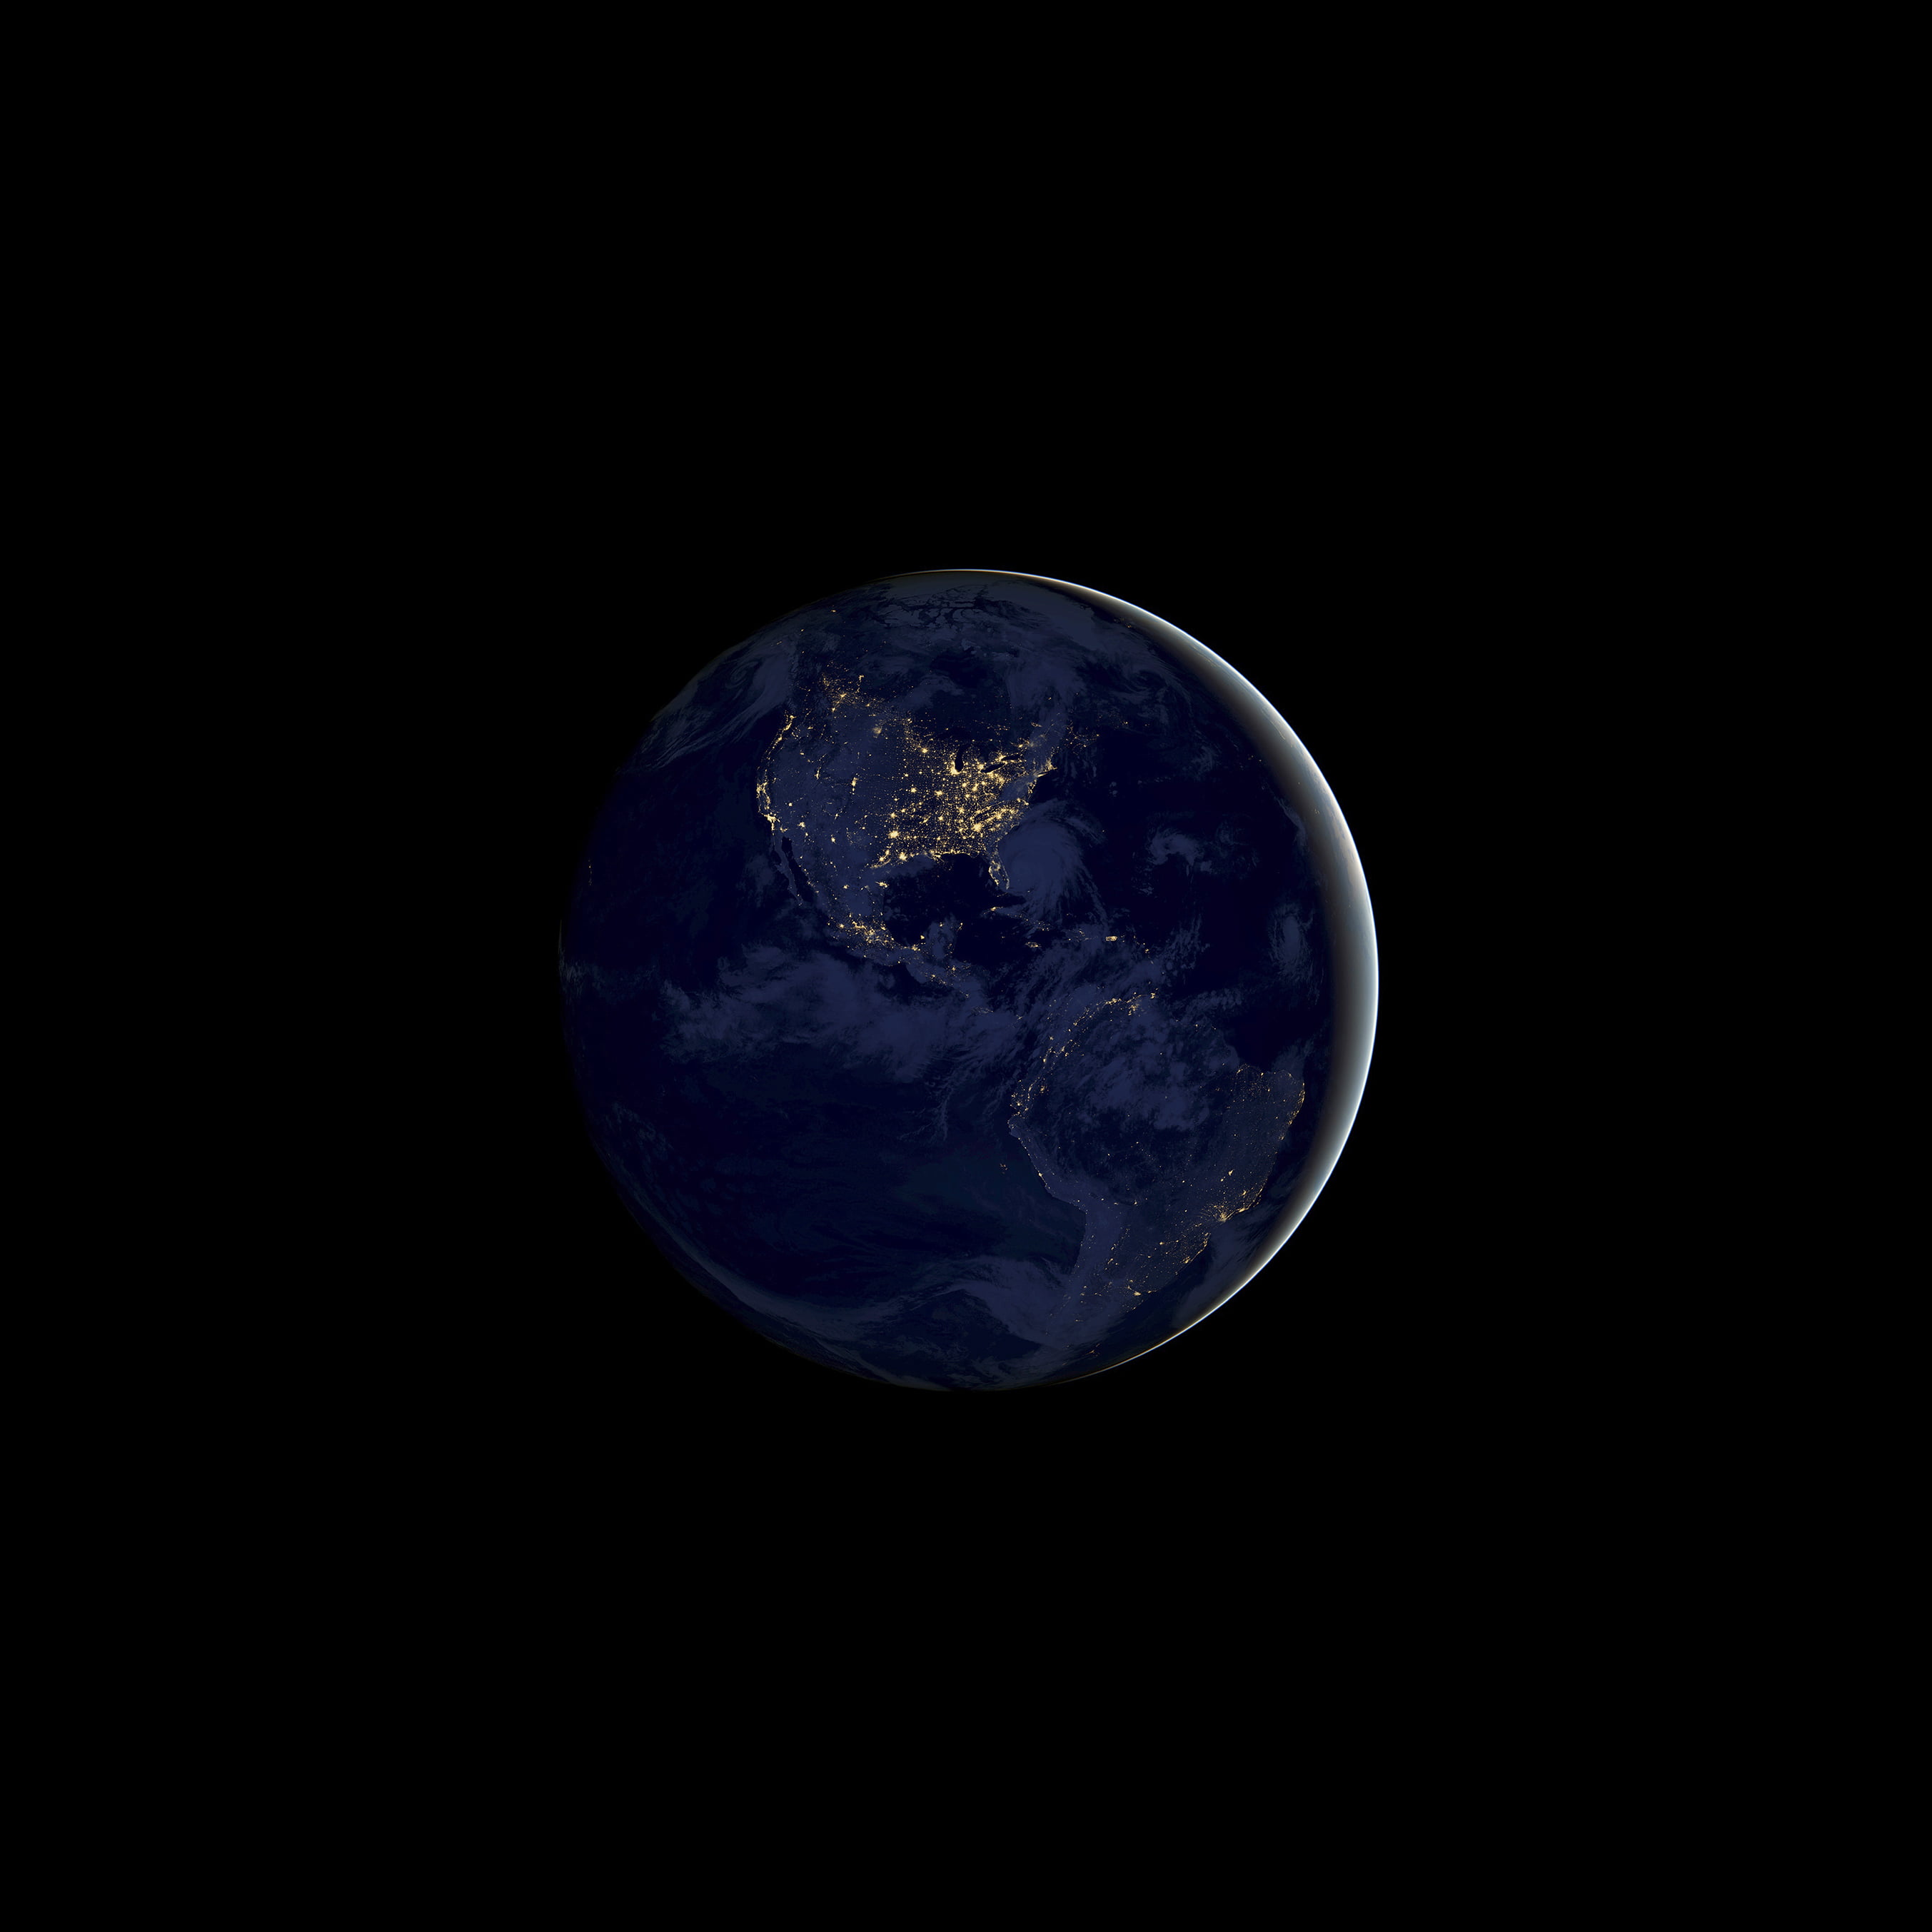 photograph of a planet